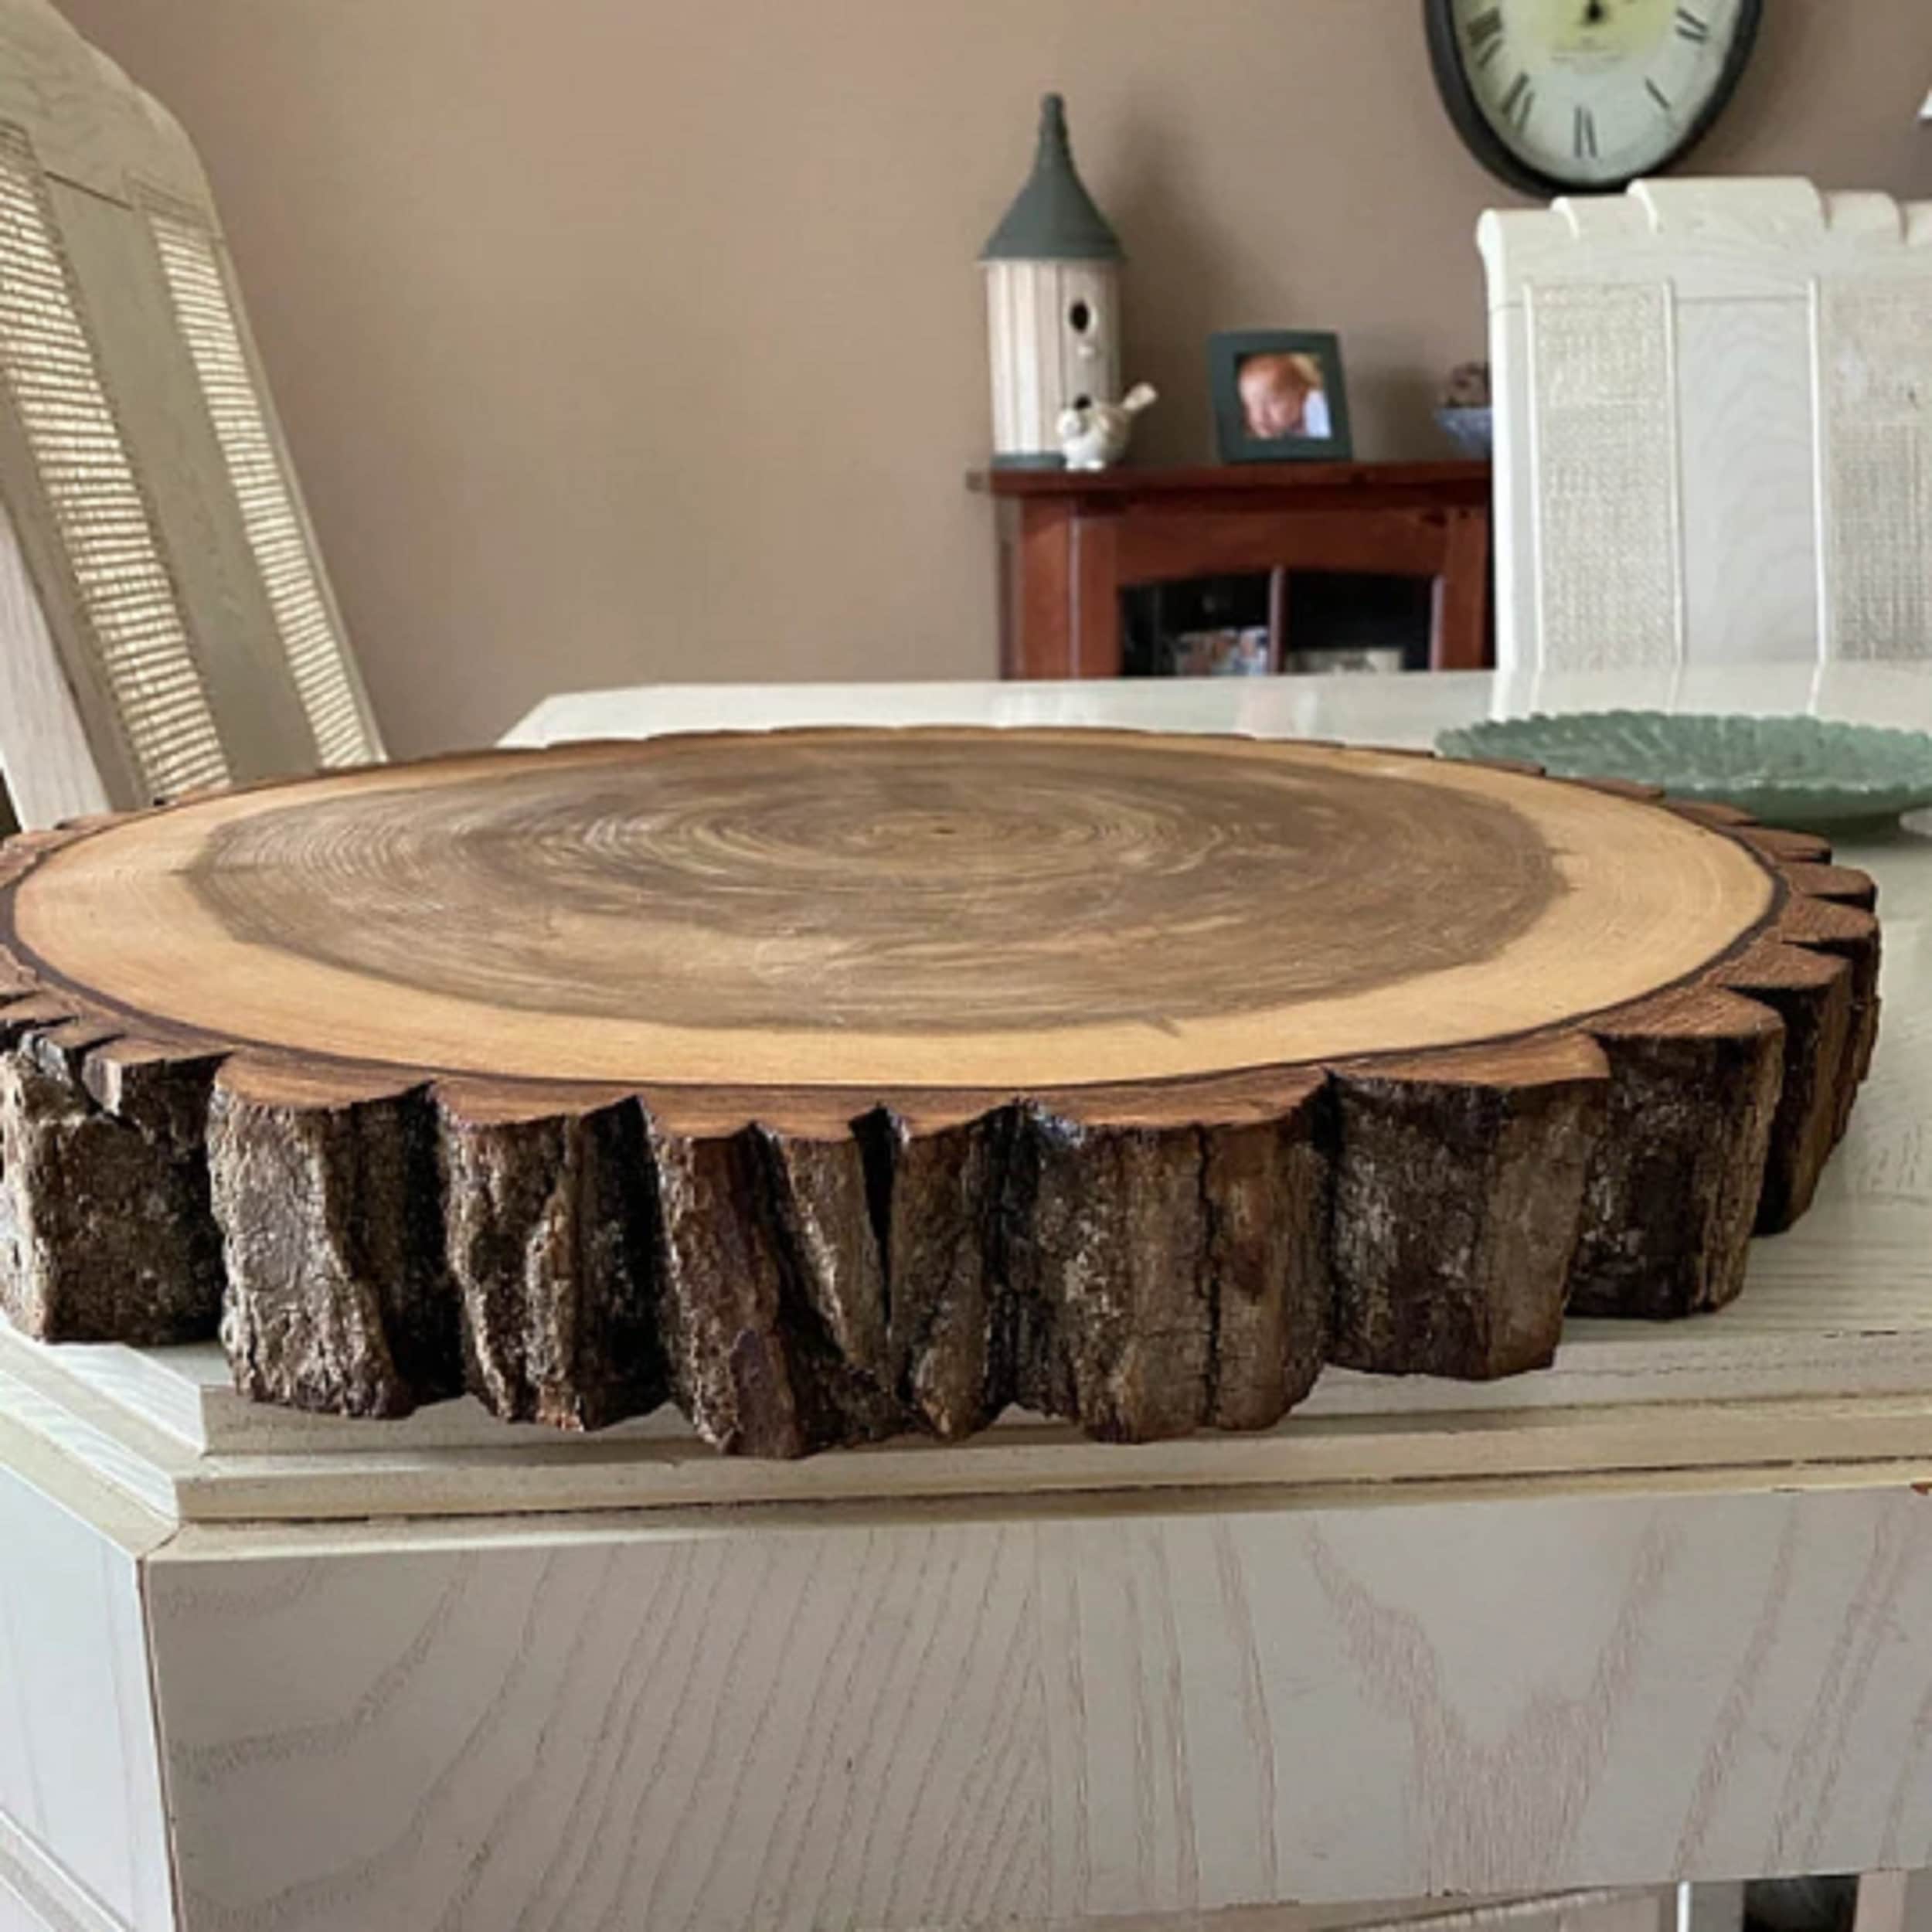 18 Dia, Extra Large Rustic Natural Wood Slices